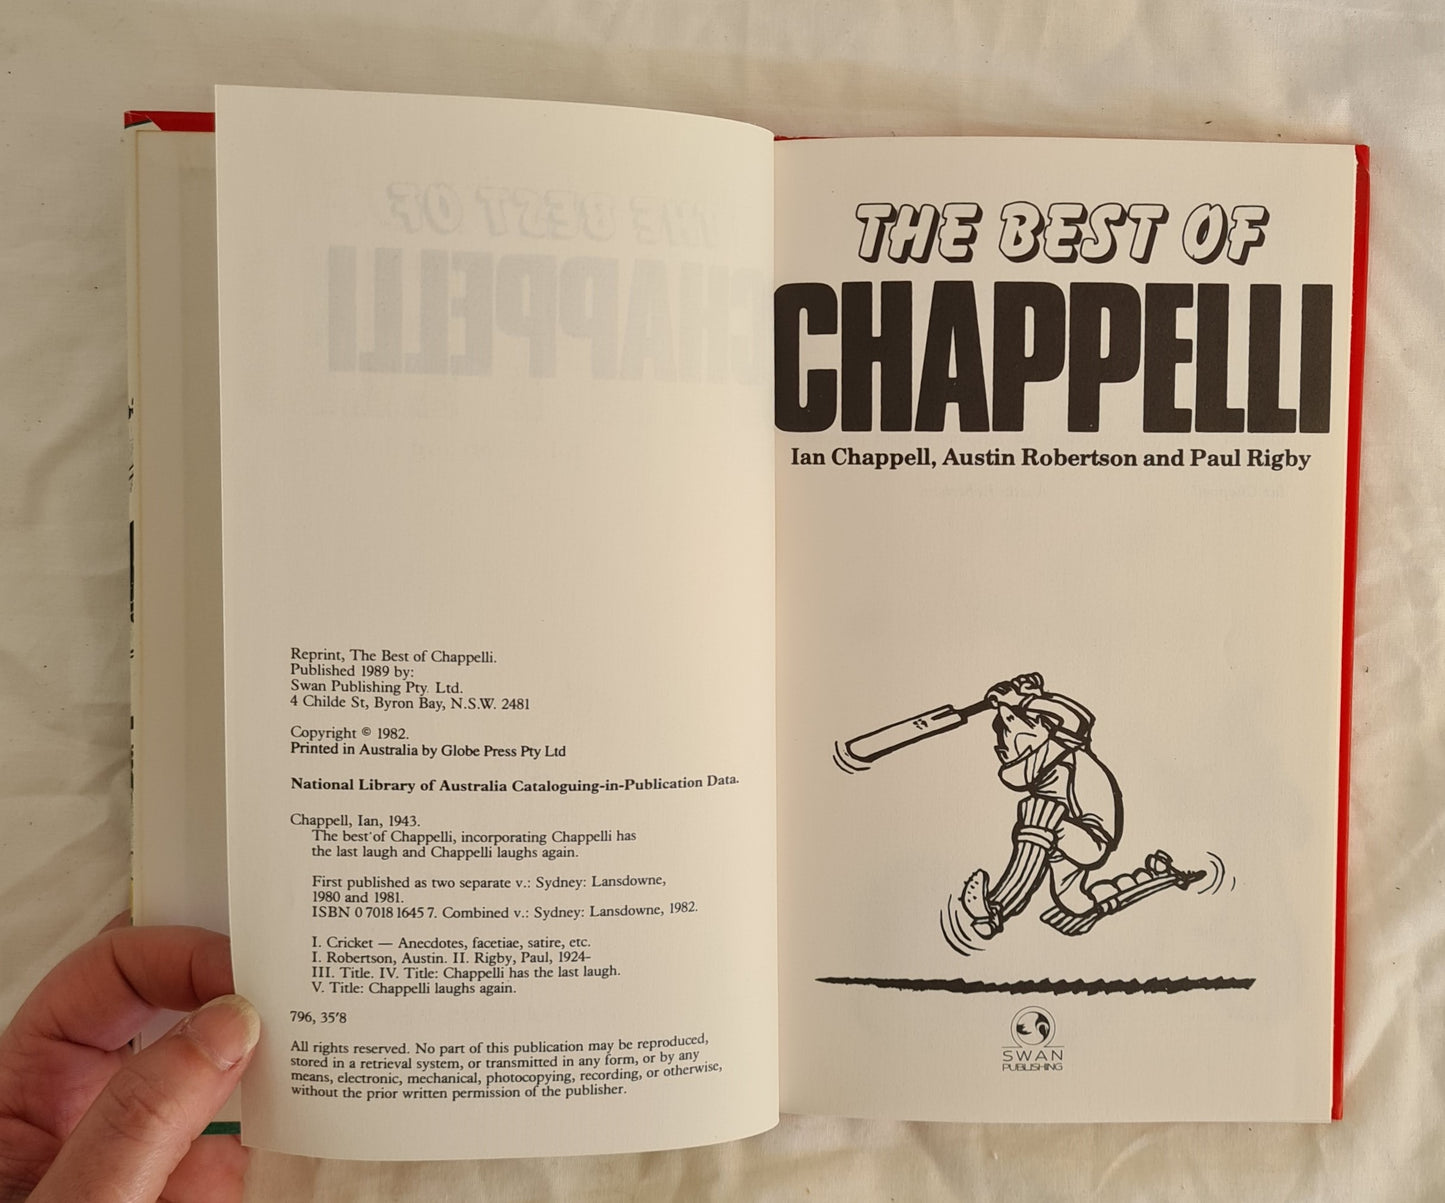 The Best of Chappelli by Ian Chappell, Austin Robertson and Paul Rigby